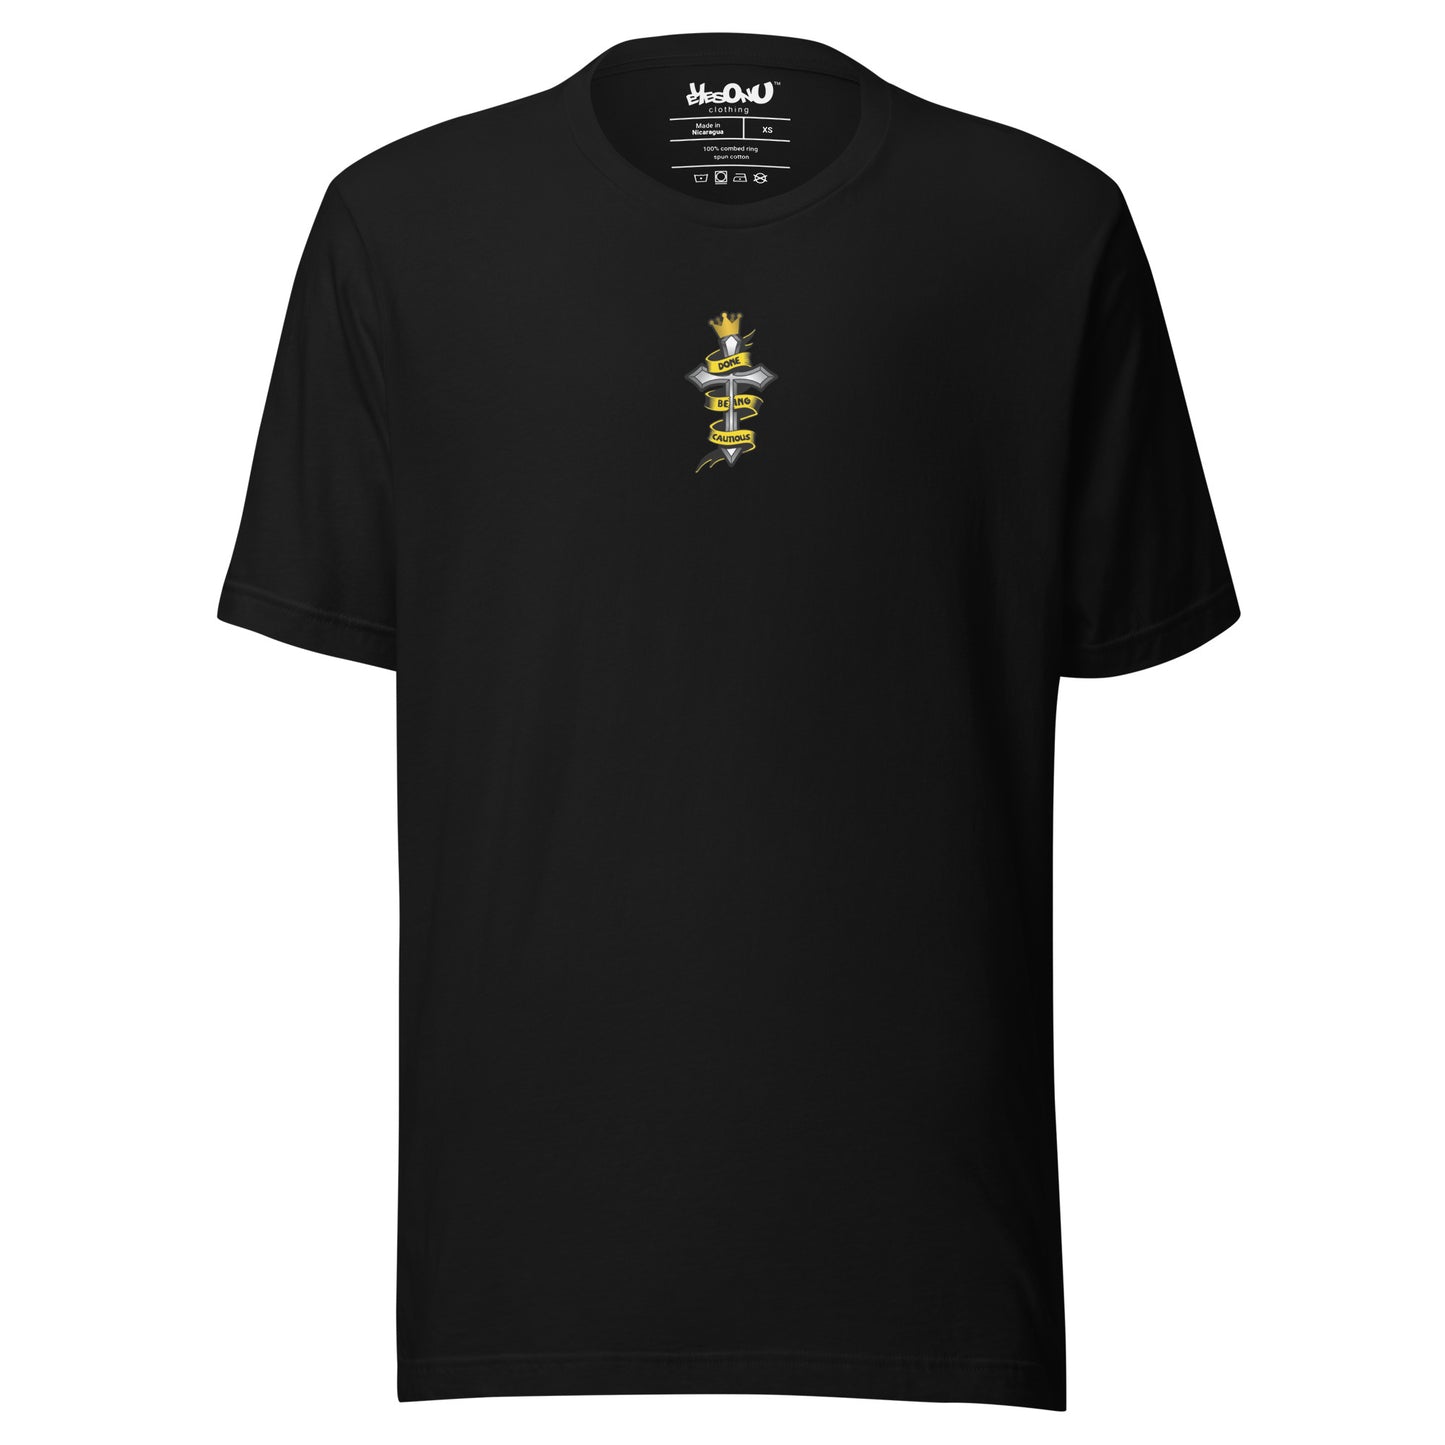 Done Being Cautious - Cross (2-sided) T-shirt (6 colors)